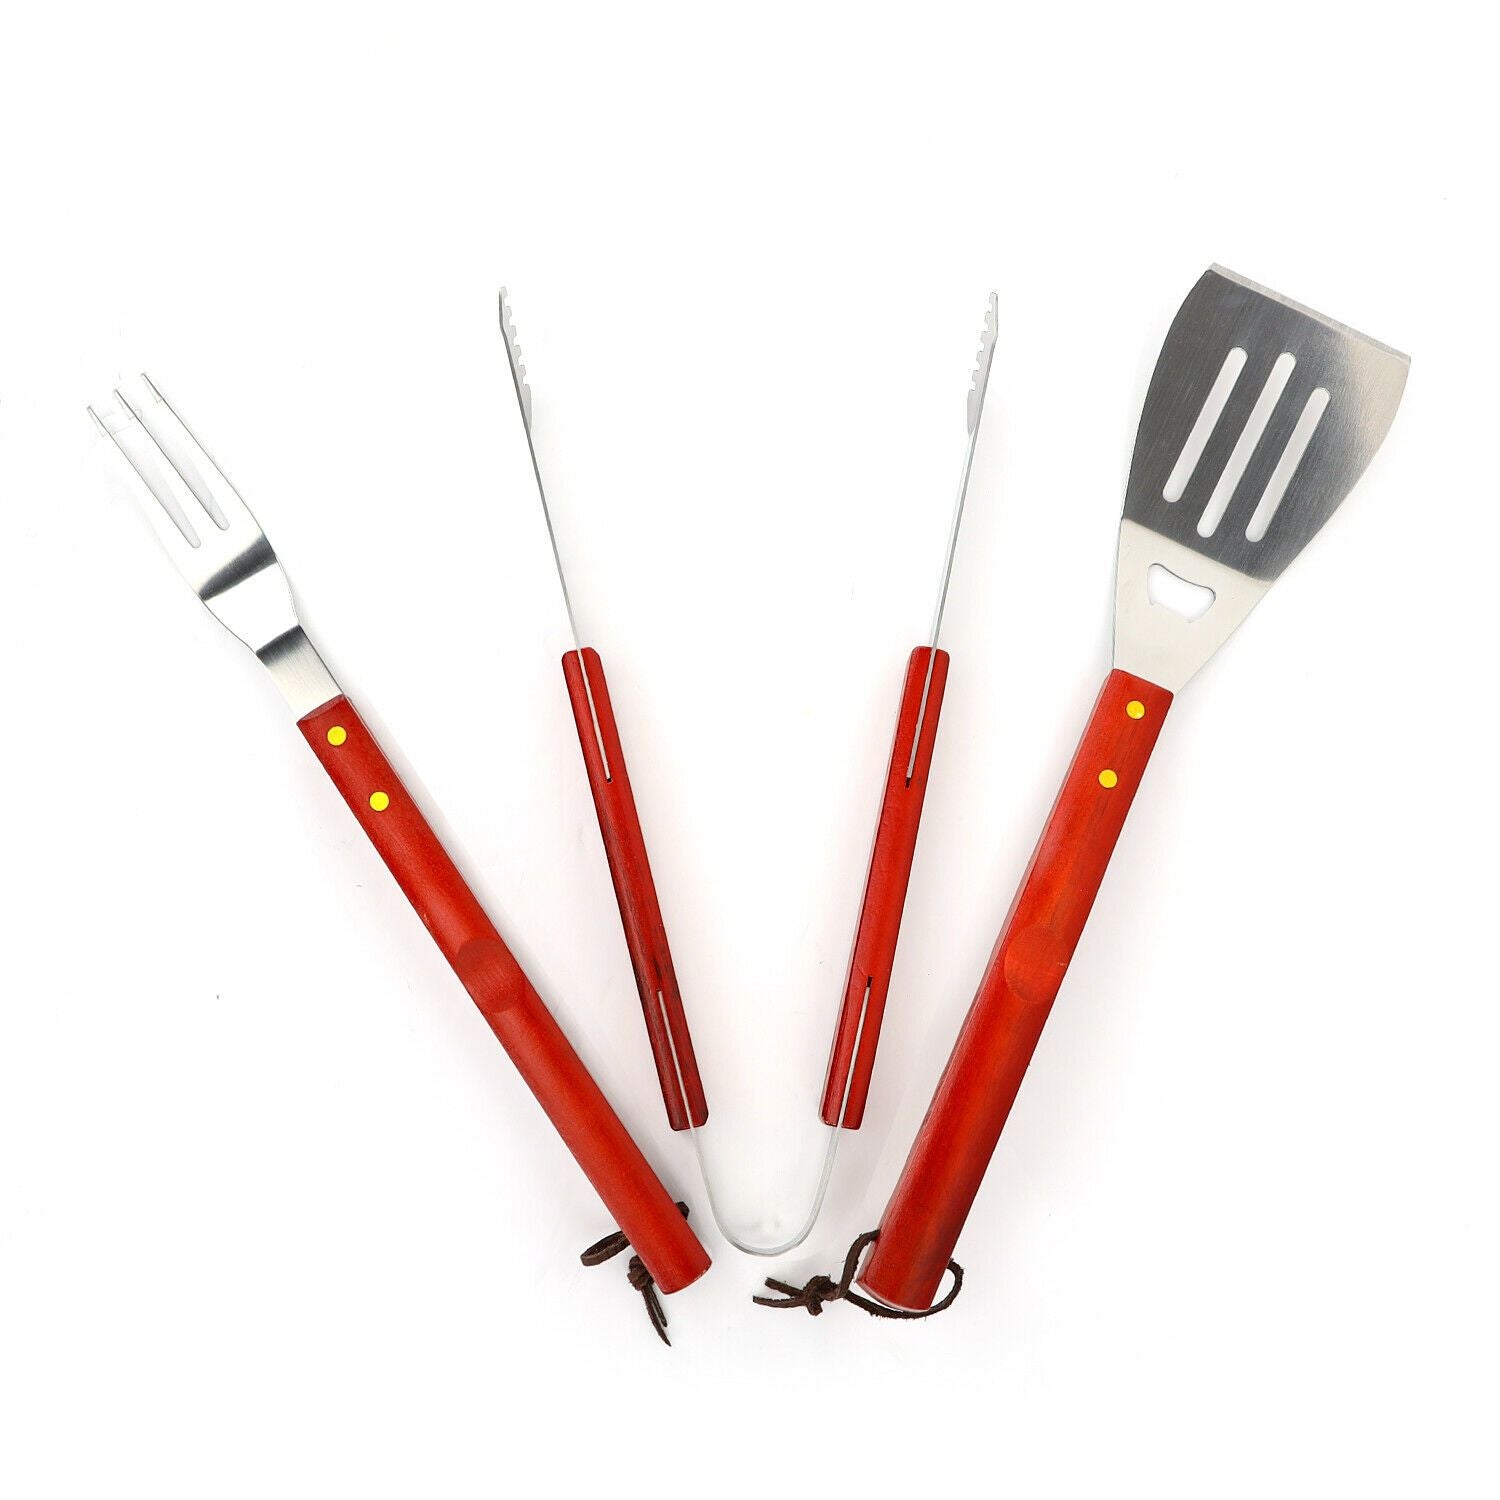 Image of BBQ Stainless Steel Barbeque Utensils Grill Tool Set By Royalford